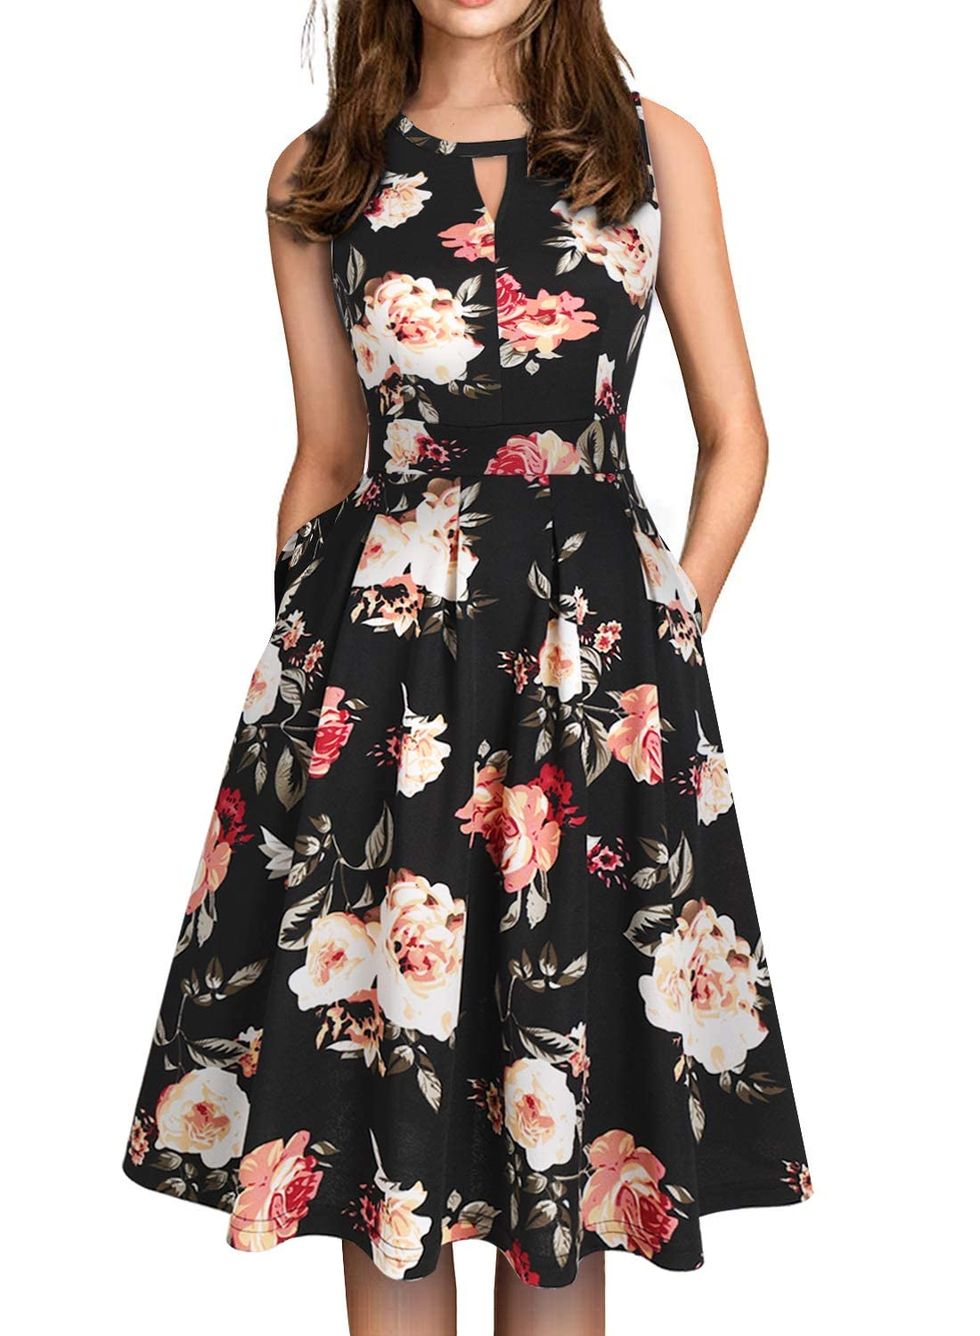 35 Best Wedding Guest Dresses On Amazon, Per Real Reviews